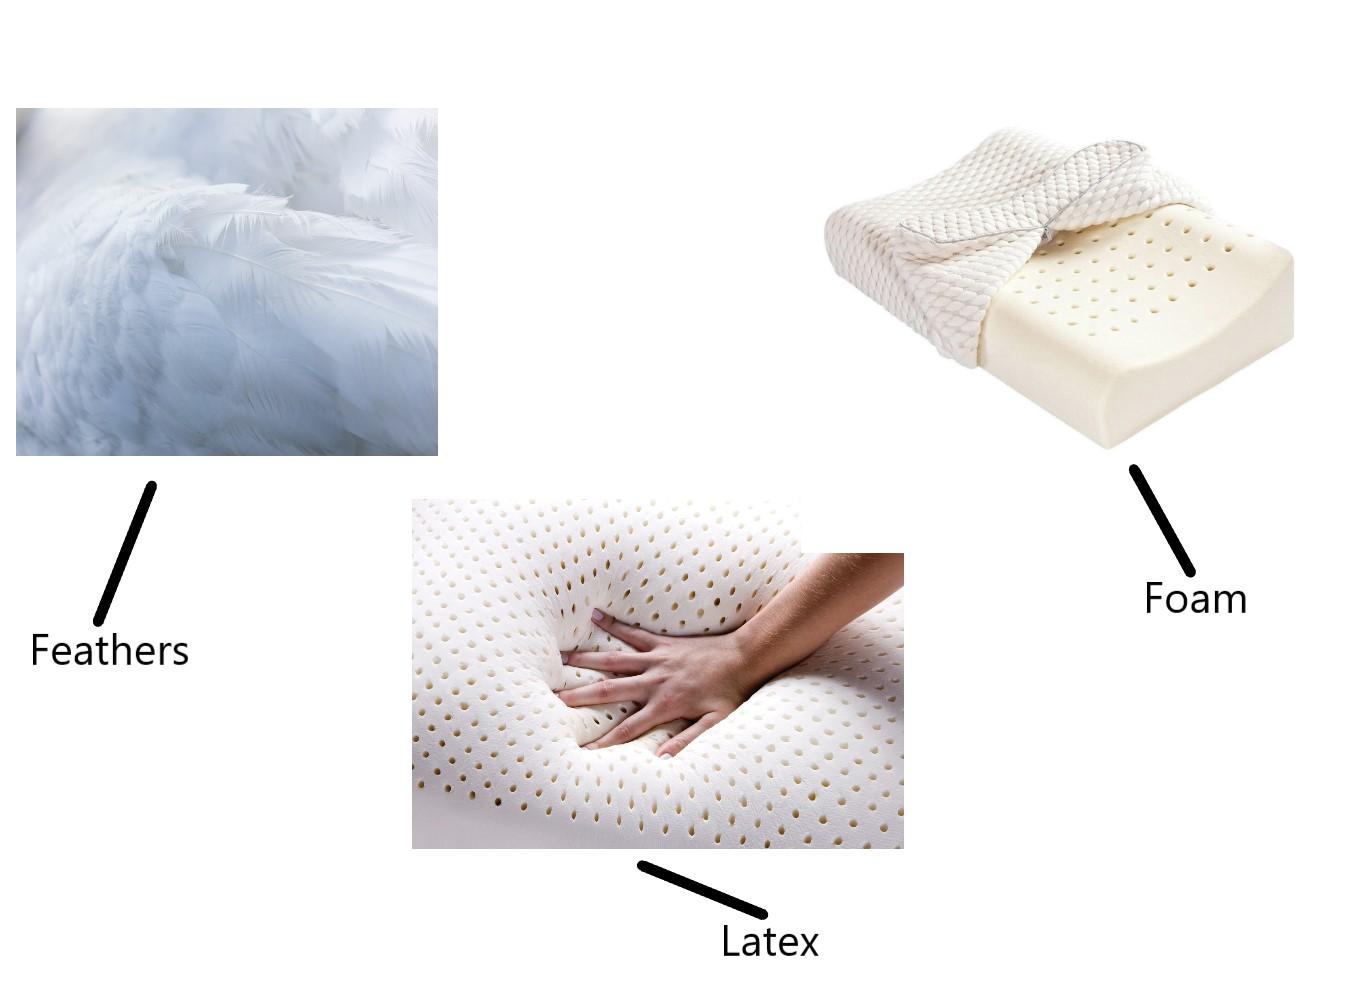 To clean a body pillow, first identify the material it is made of